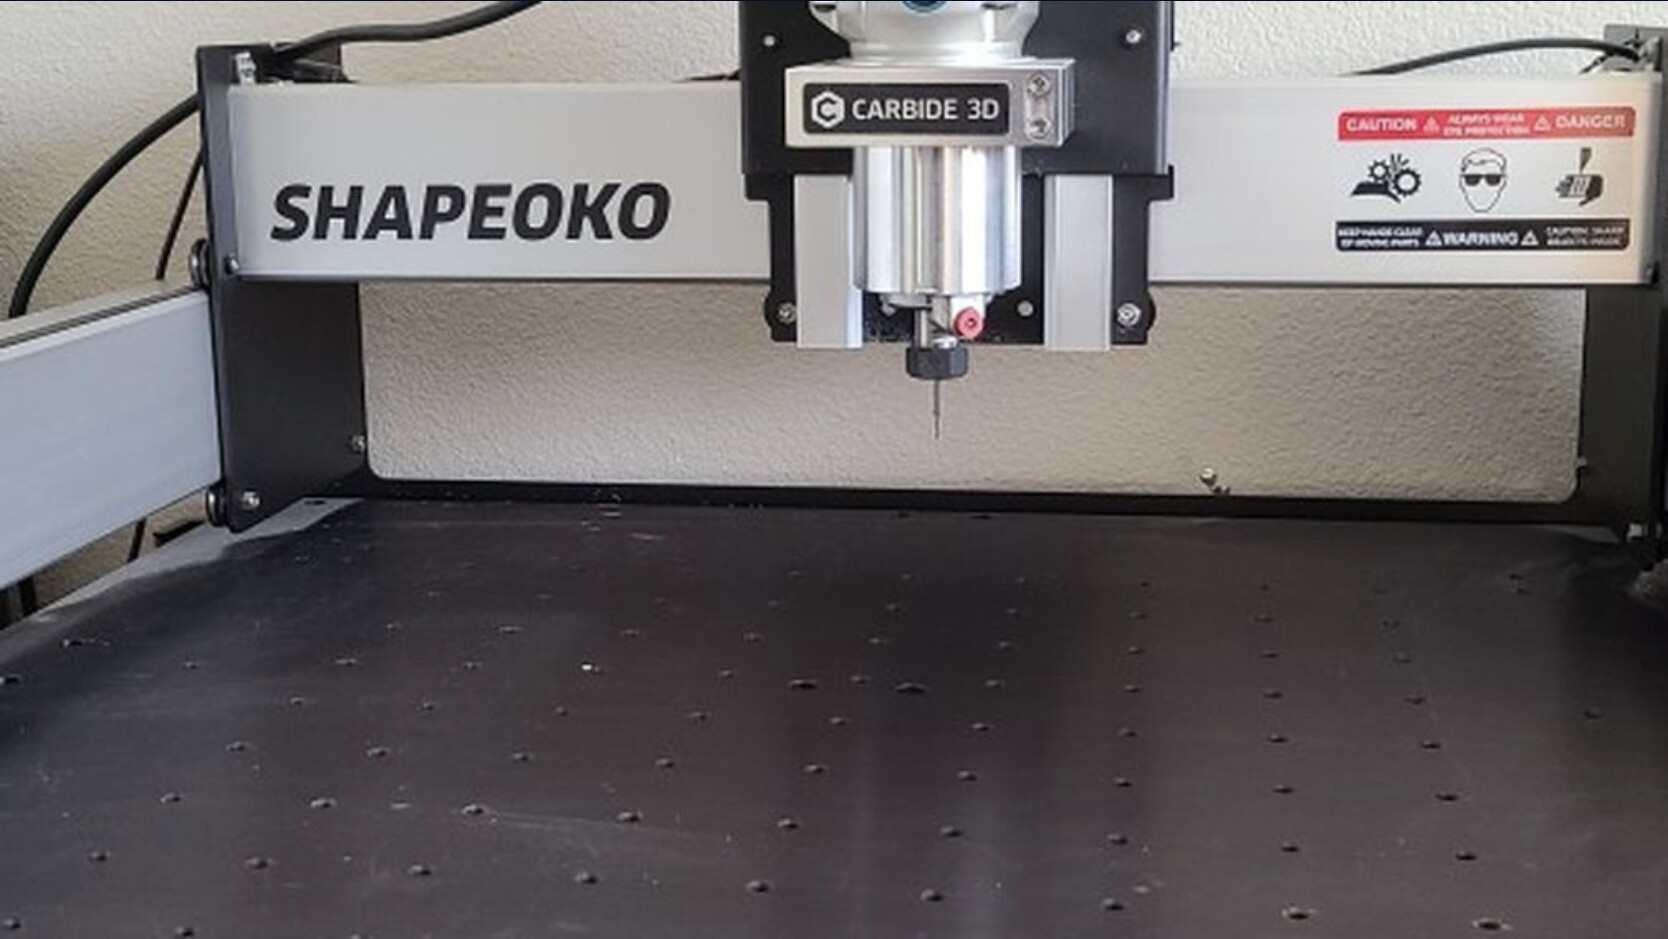 Difference between flat and fishtail endmills - Shapeoko - Carbide 3D  Community Site